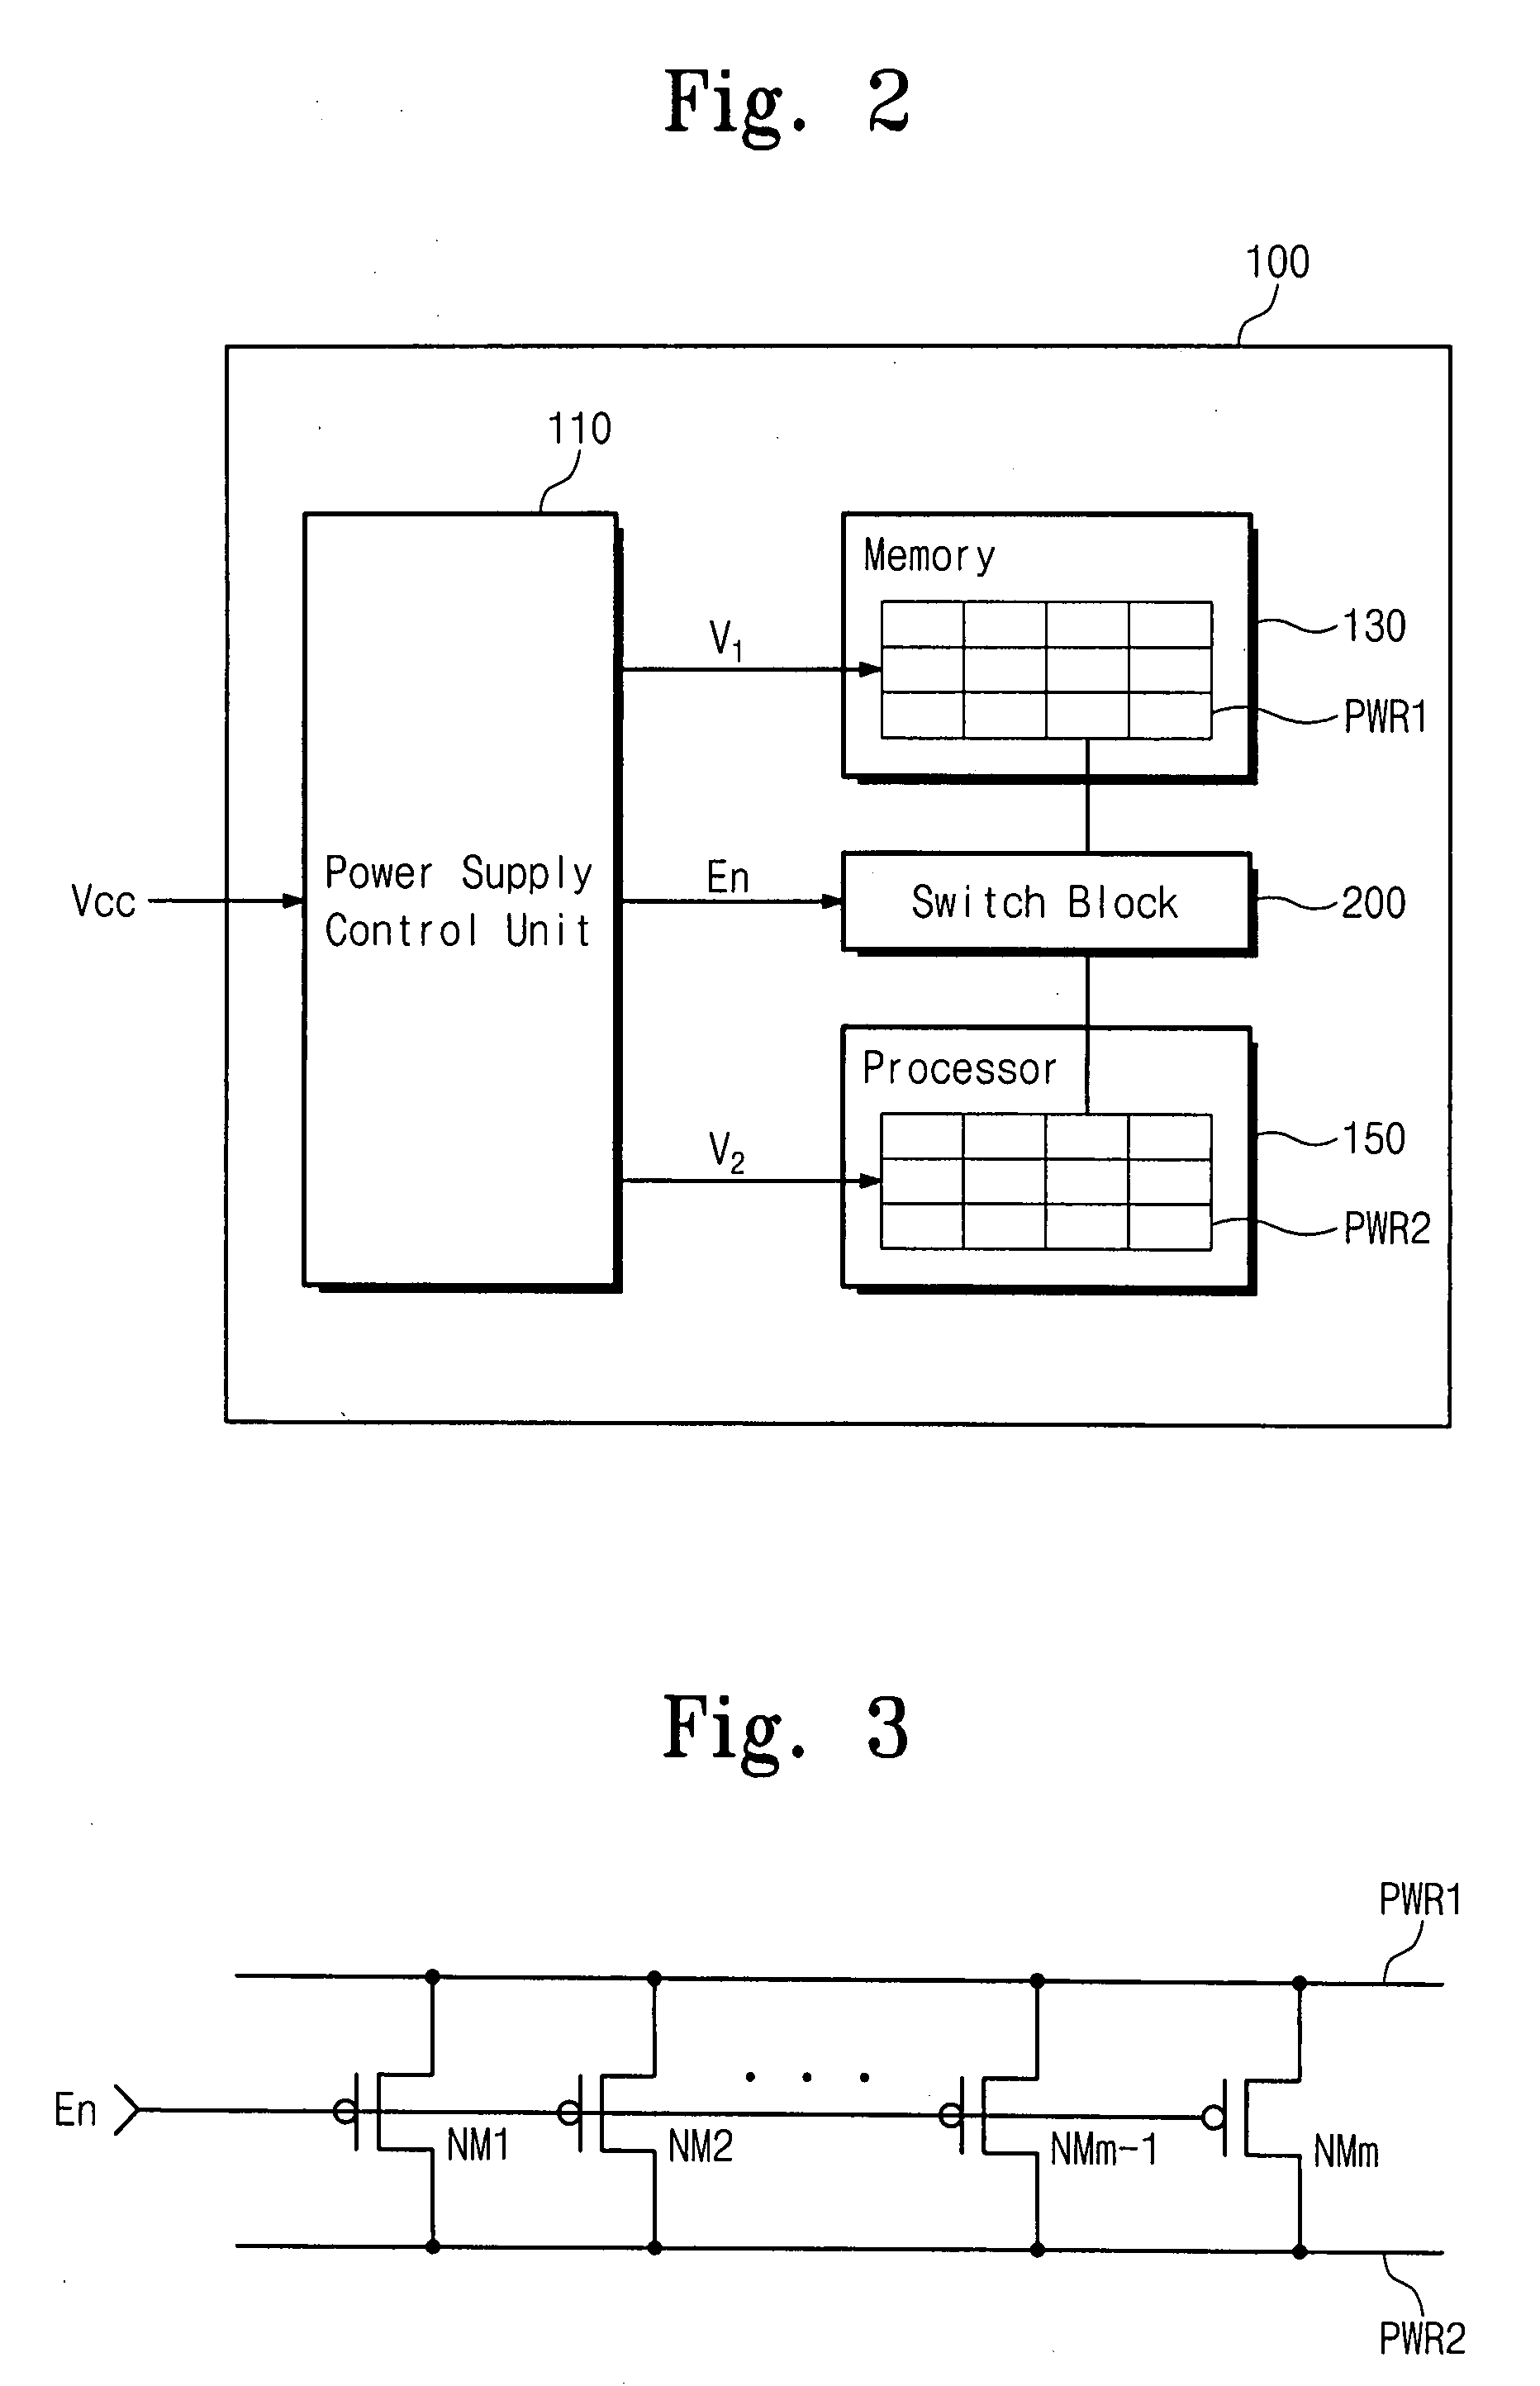 Integrated circuit having multiple power domains